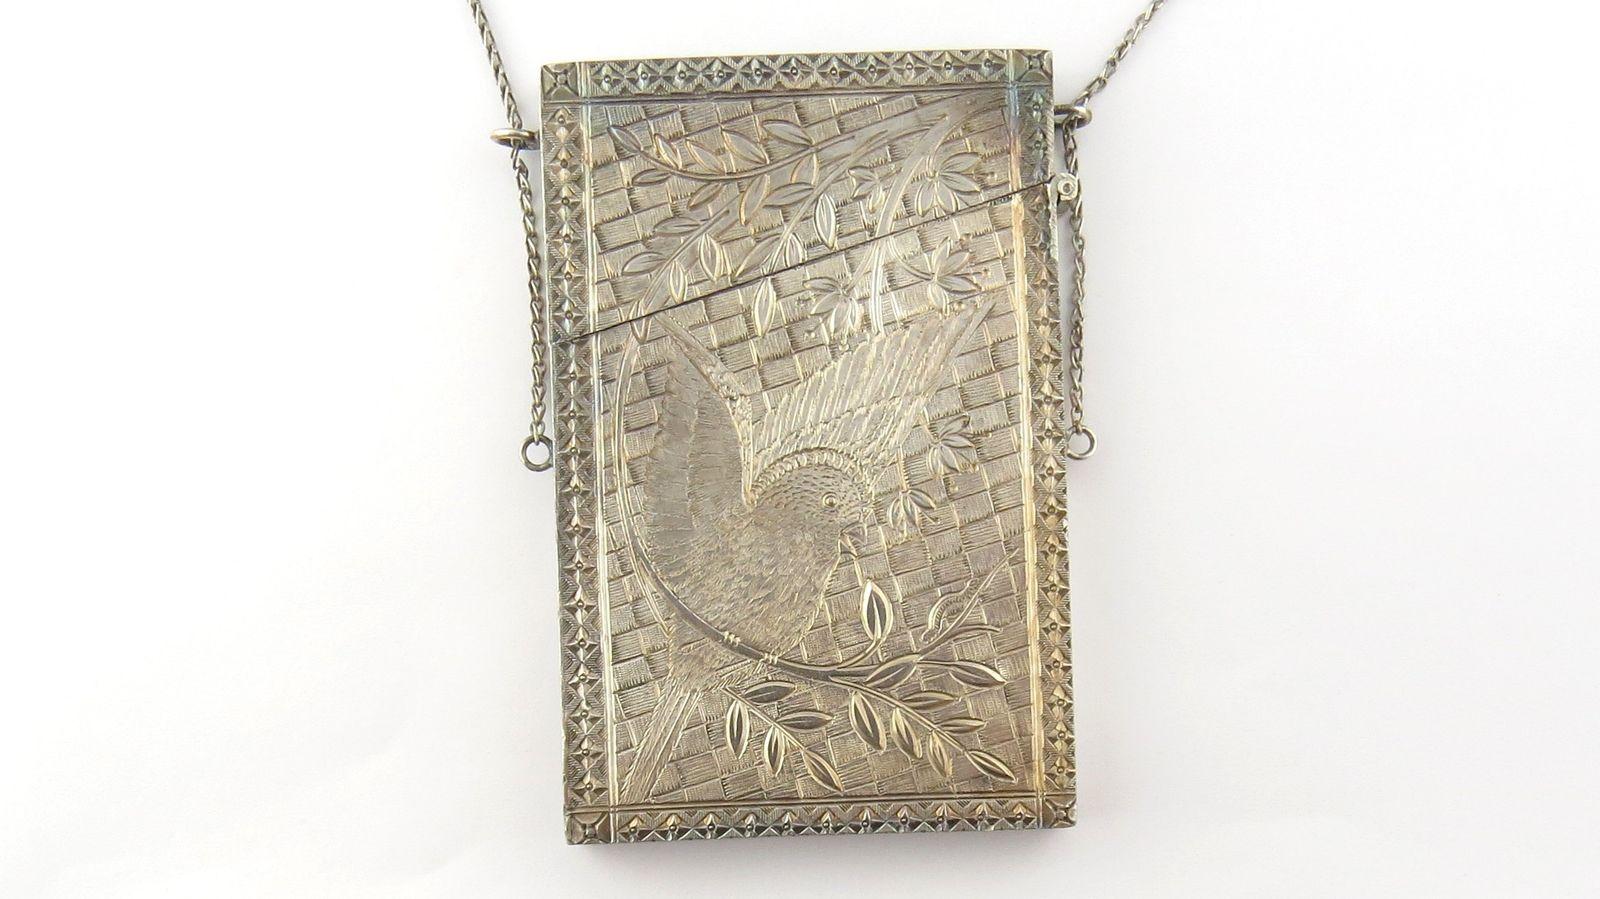 Antique Victorian silver coin metal calling card case. This stunning collectible calling card case is beautifully engraved with a lovely bird design with crosshatch background. Original chain with pinky holding ring. Size: 3.75 inches x 2.4 inches.